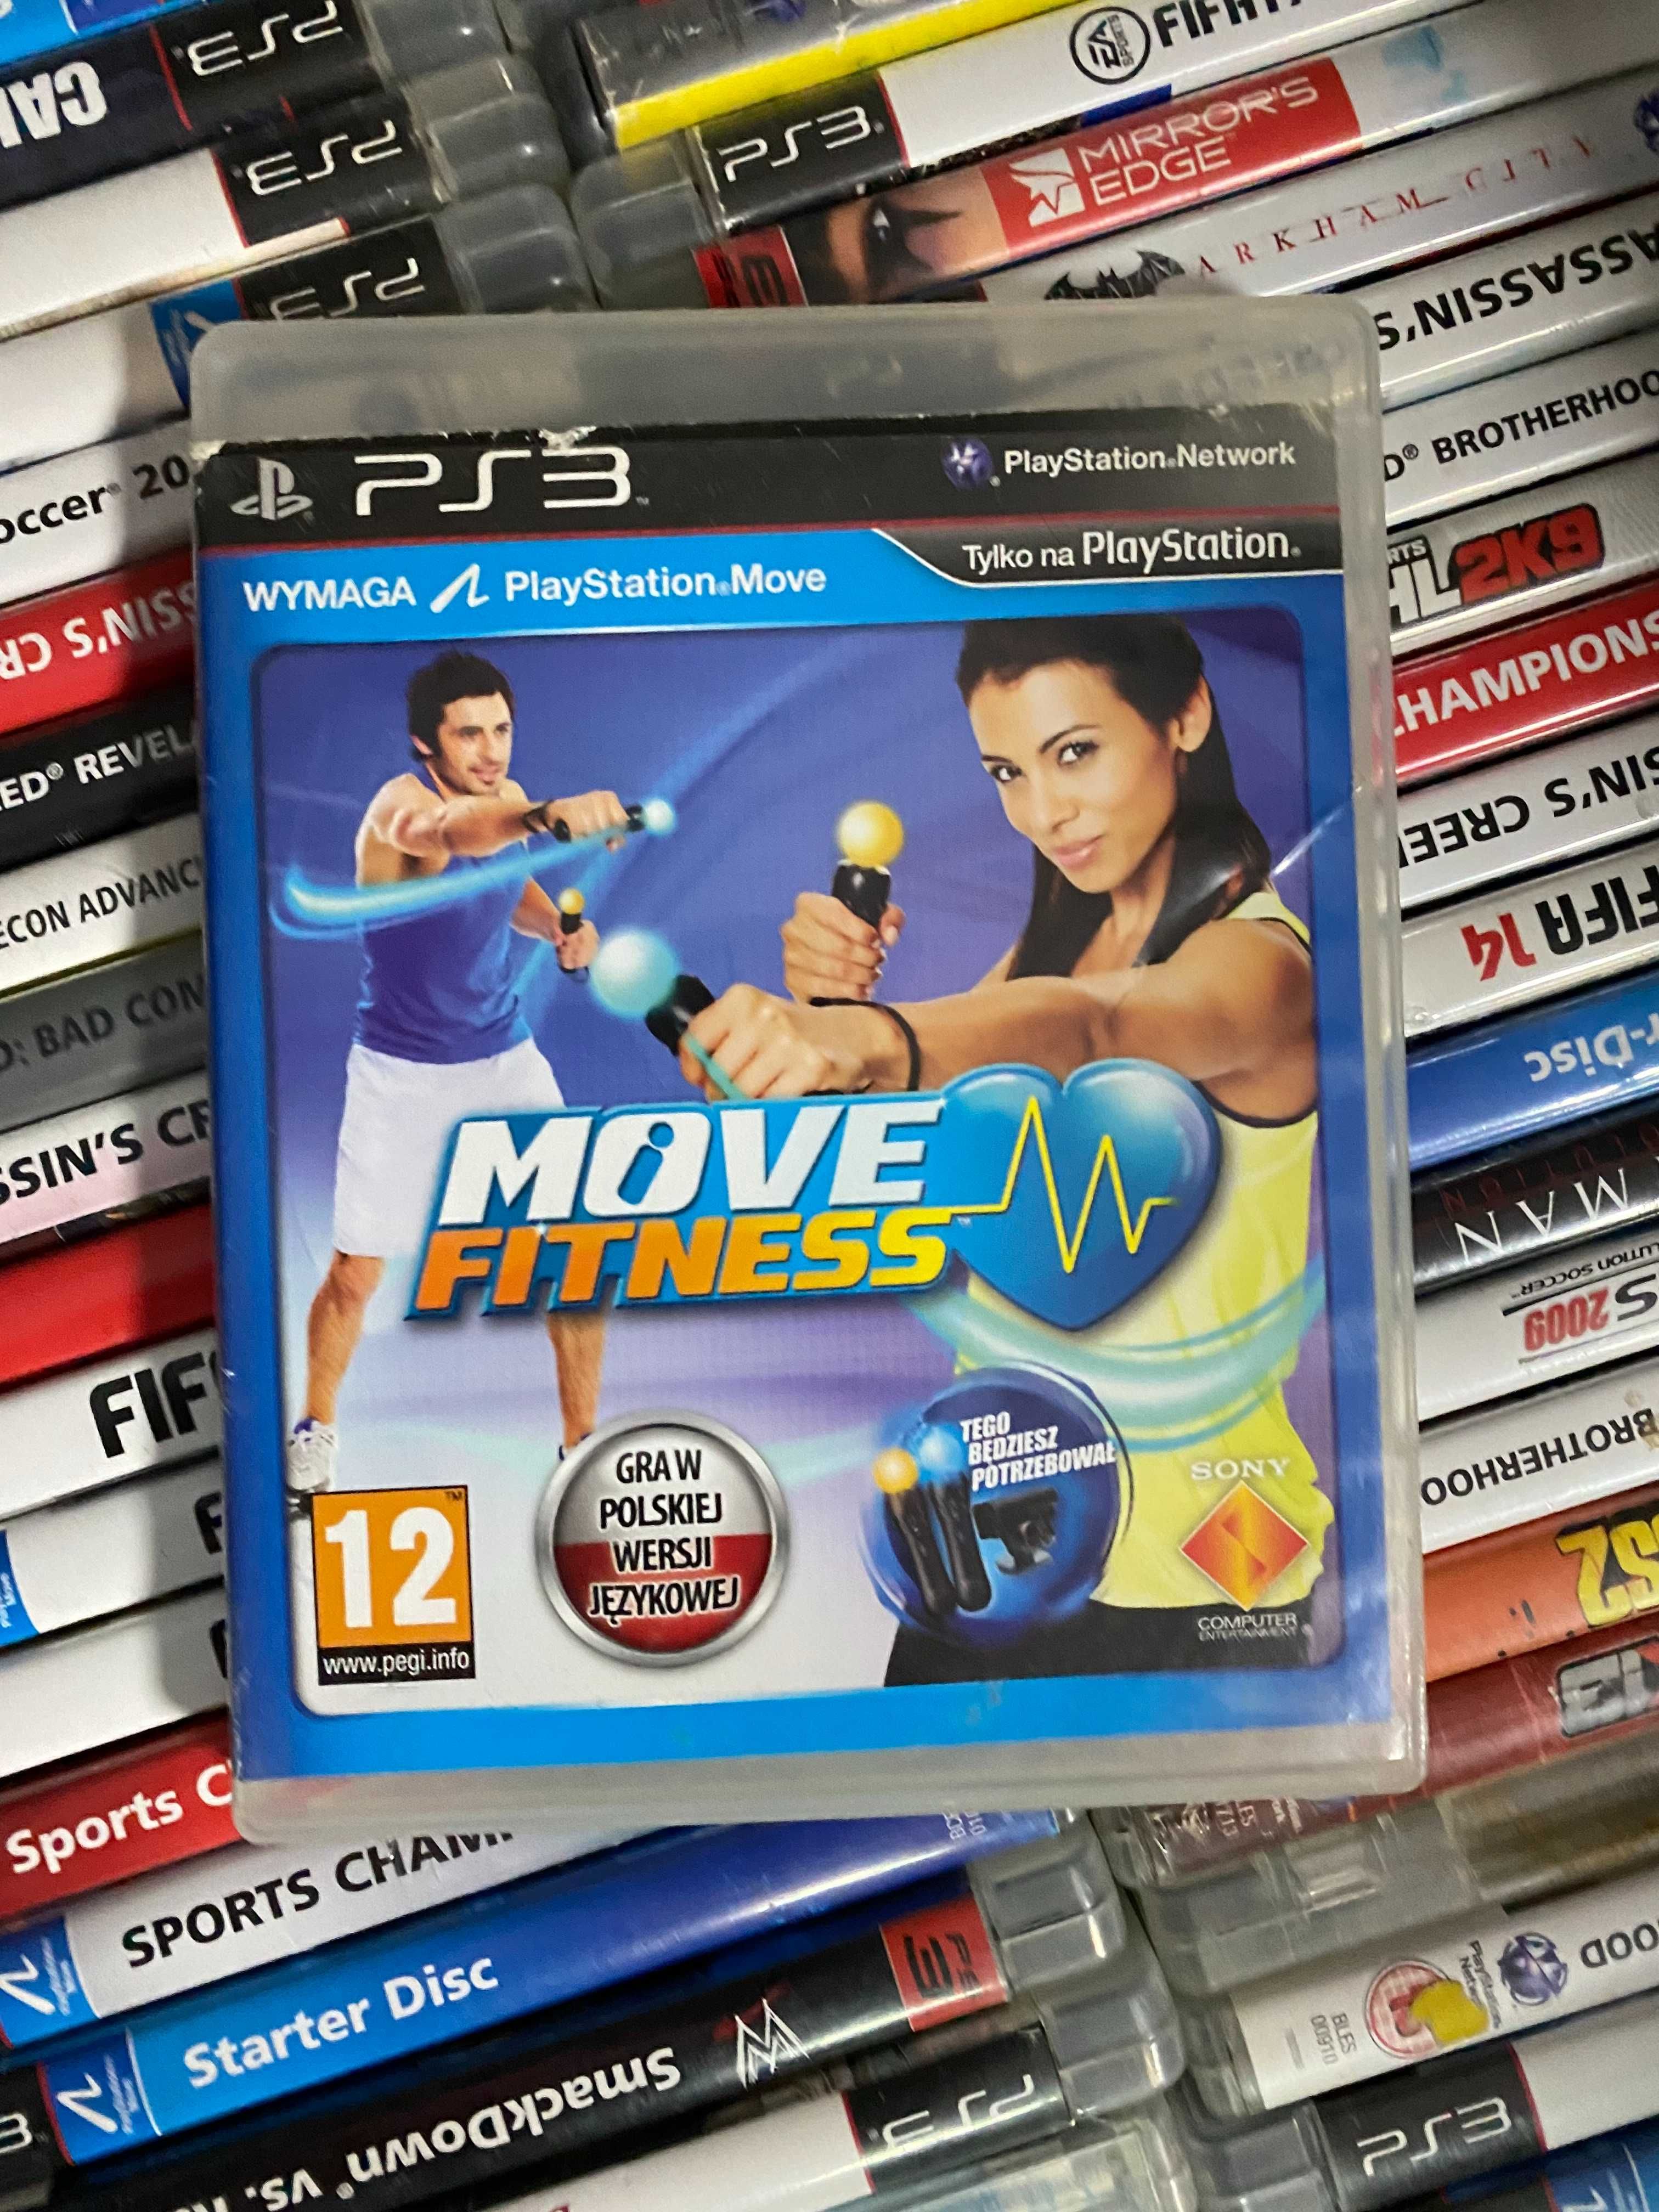 Move Fitness|PS3